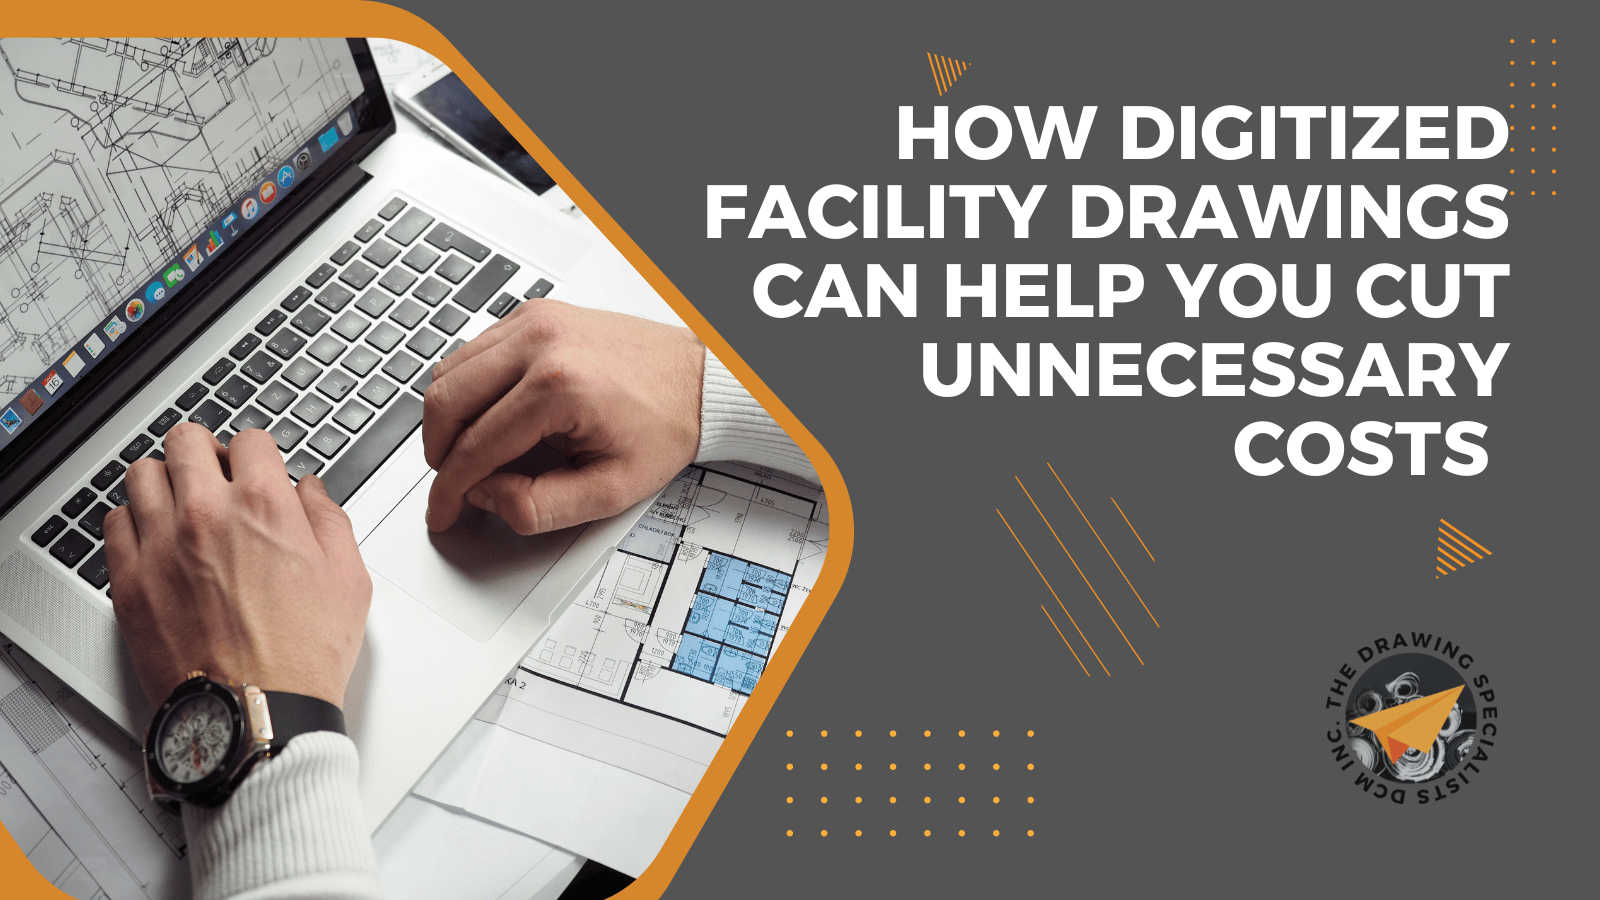 How to Make Your Facility Drawings Work for You While Cutting Unnecessary Costs